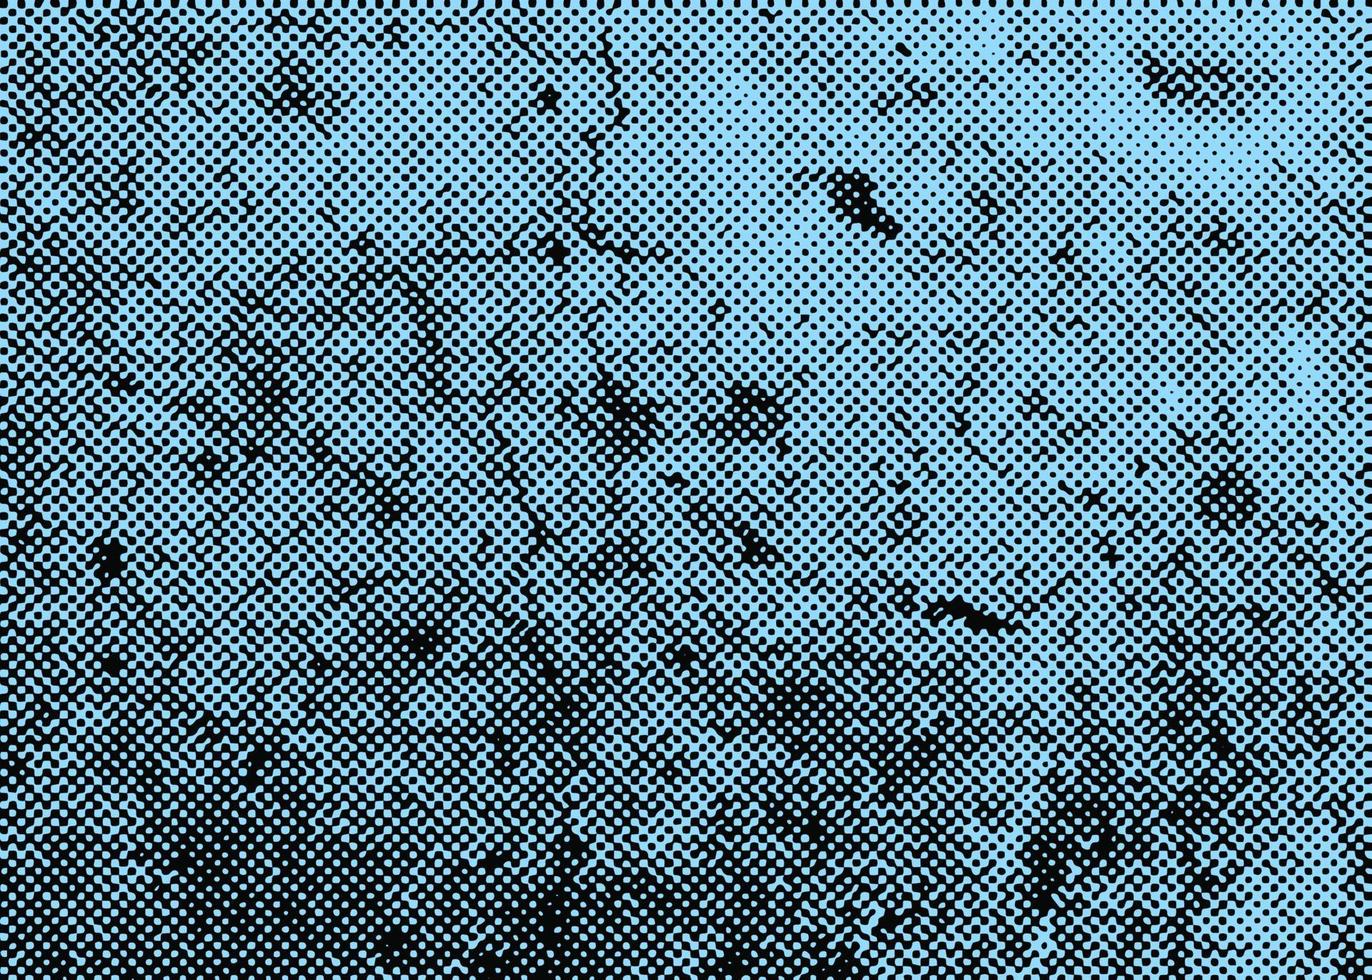 grungy, grunge effect, grunge texture,distressed background, abstract dots, dotted circle, grain effect, halftone circle, grain texture, splatter texture, grunge background, grunge pattern, vector